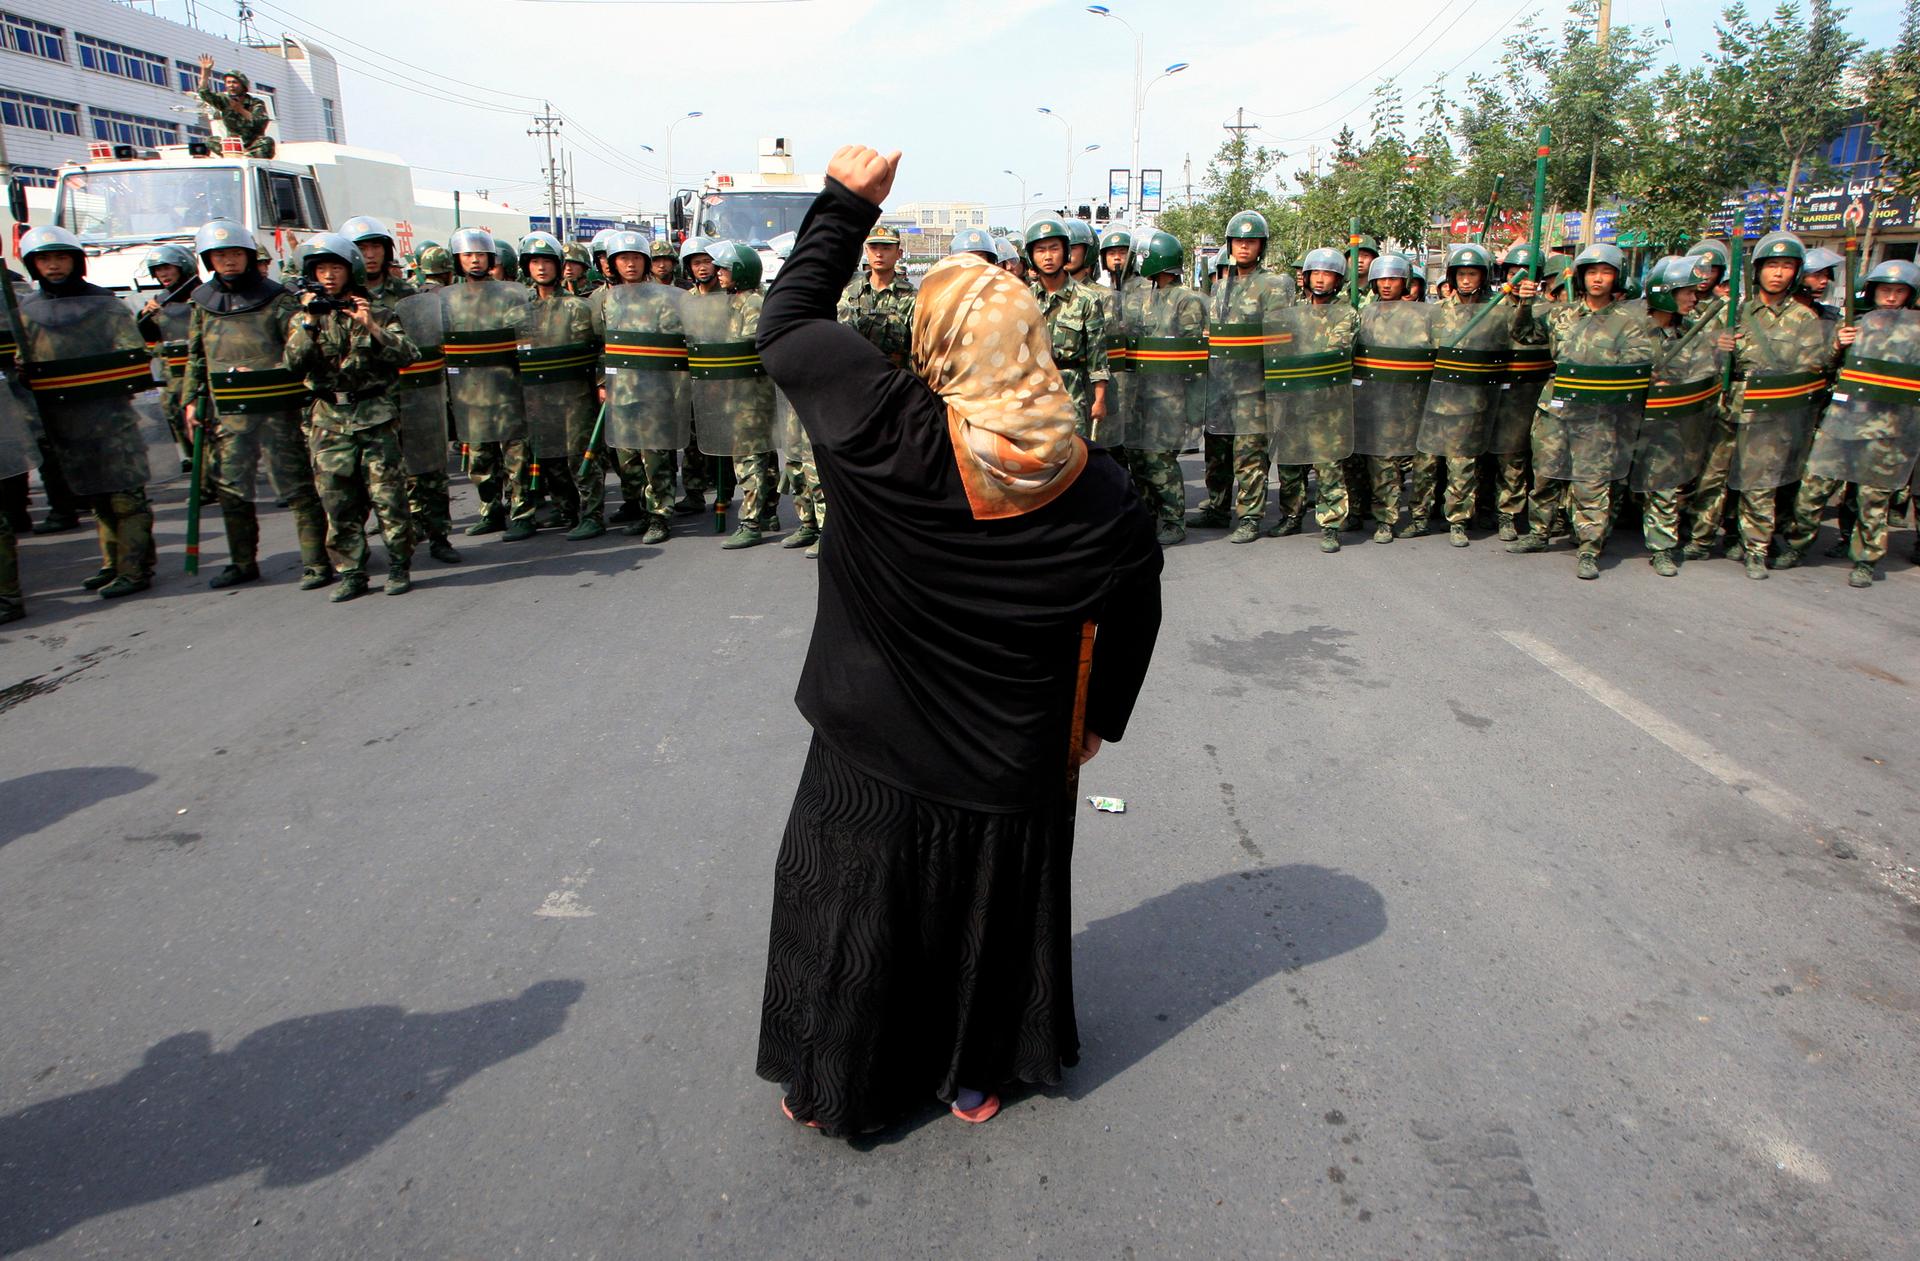 A local woman on a crutch shouts at Chinese paramilitary police as a crowd of angry locals confront security forces on a street in the city of Urumqi in China's Xinjiang Autonomous Region in 2009.